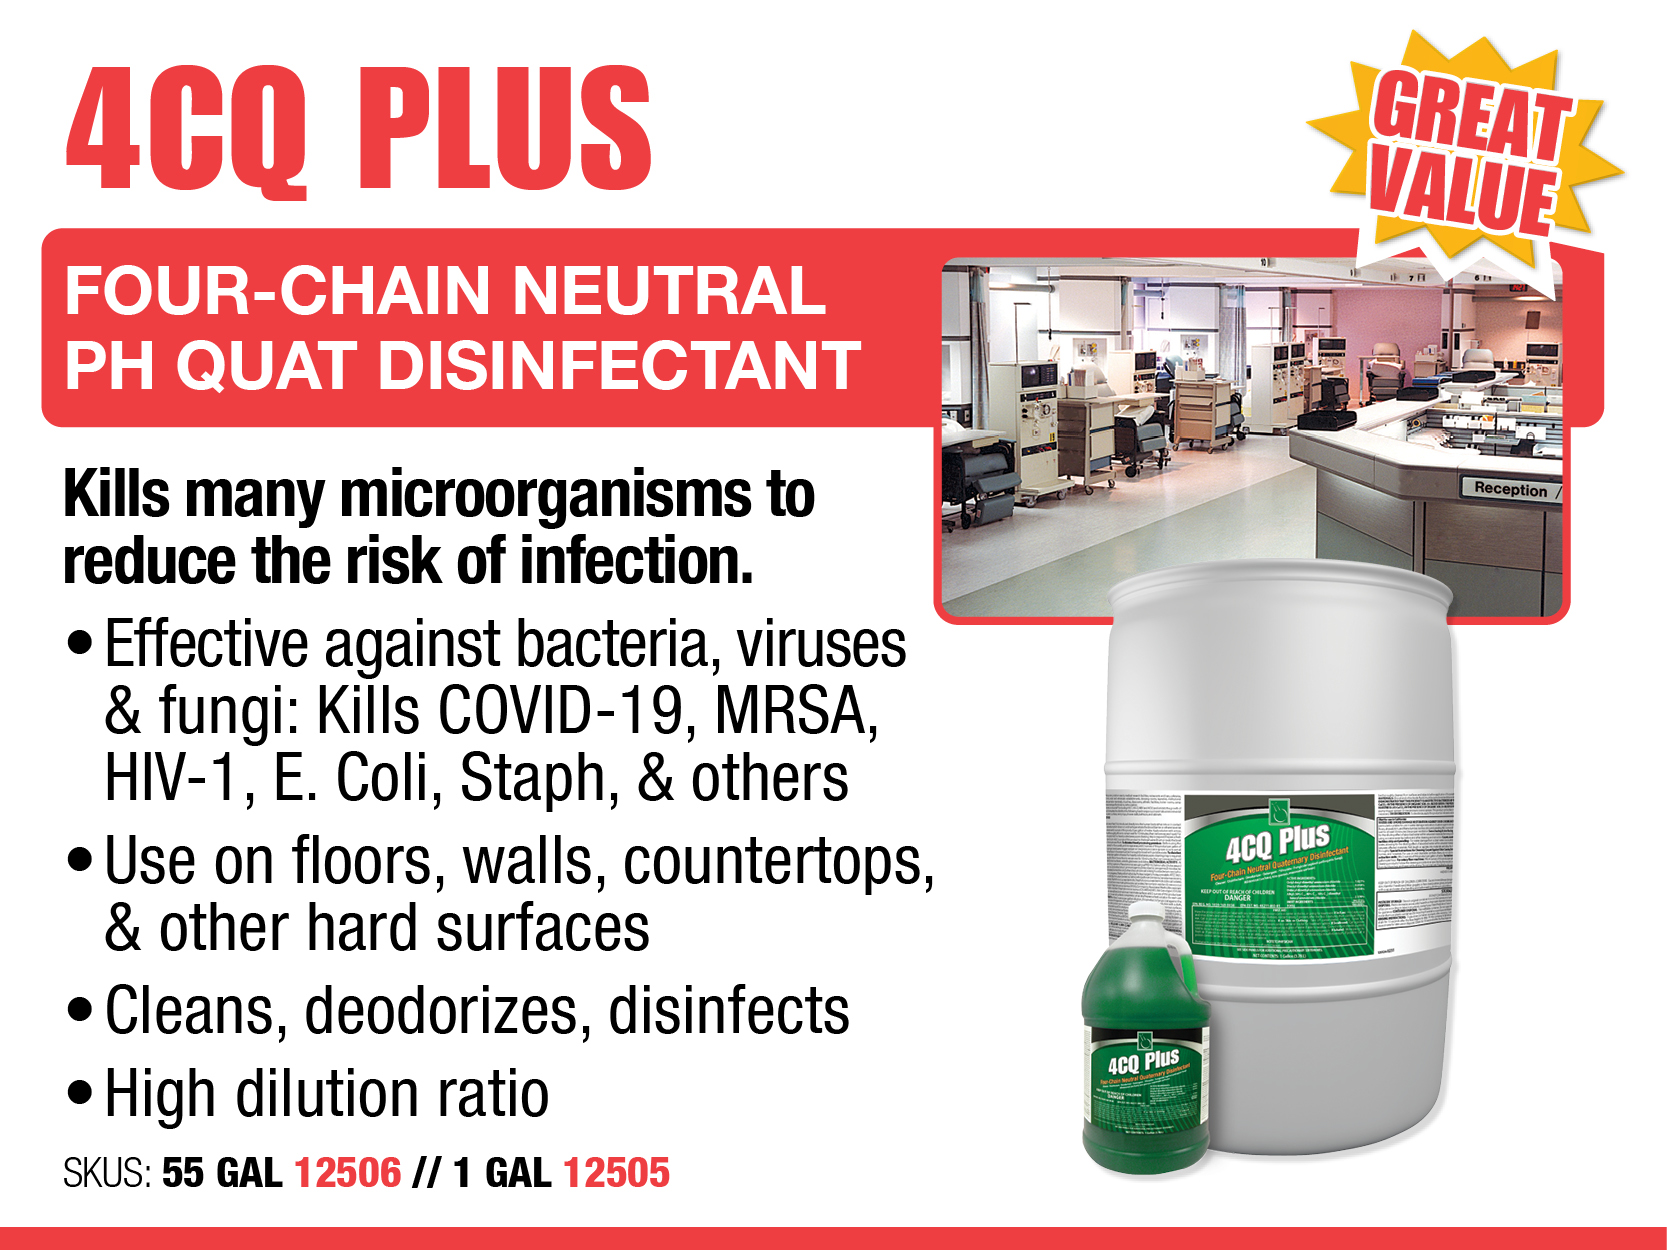 4CQ Plus - Floor, Wall, Surface Cleaner - Cold and Flu Prevention - Deodorize, Disinfect, Kill COVID-19